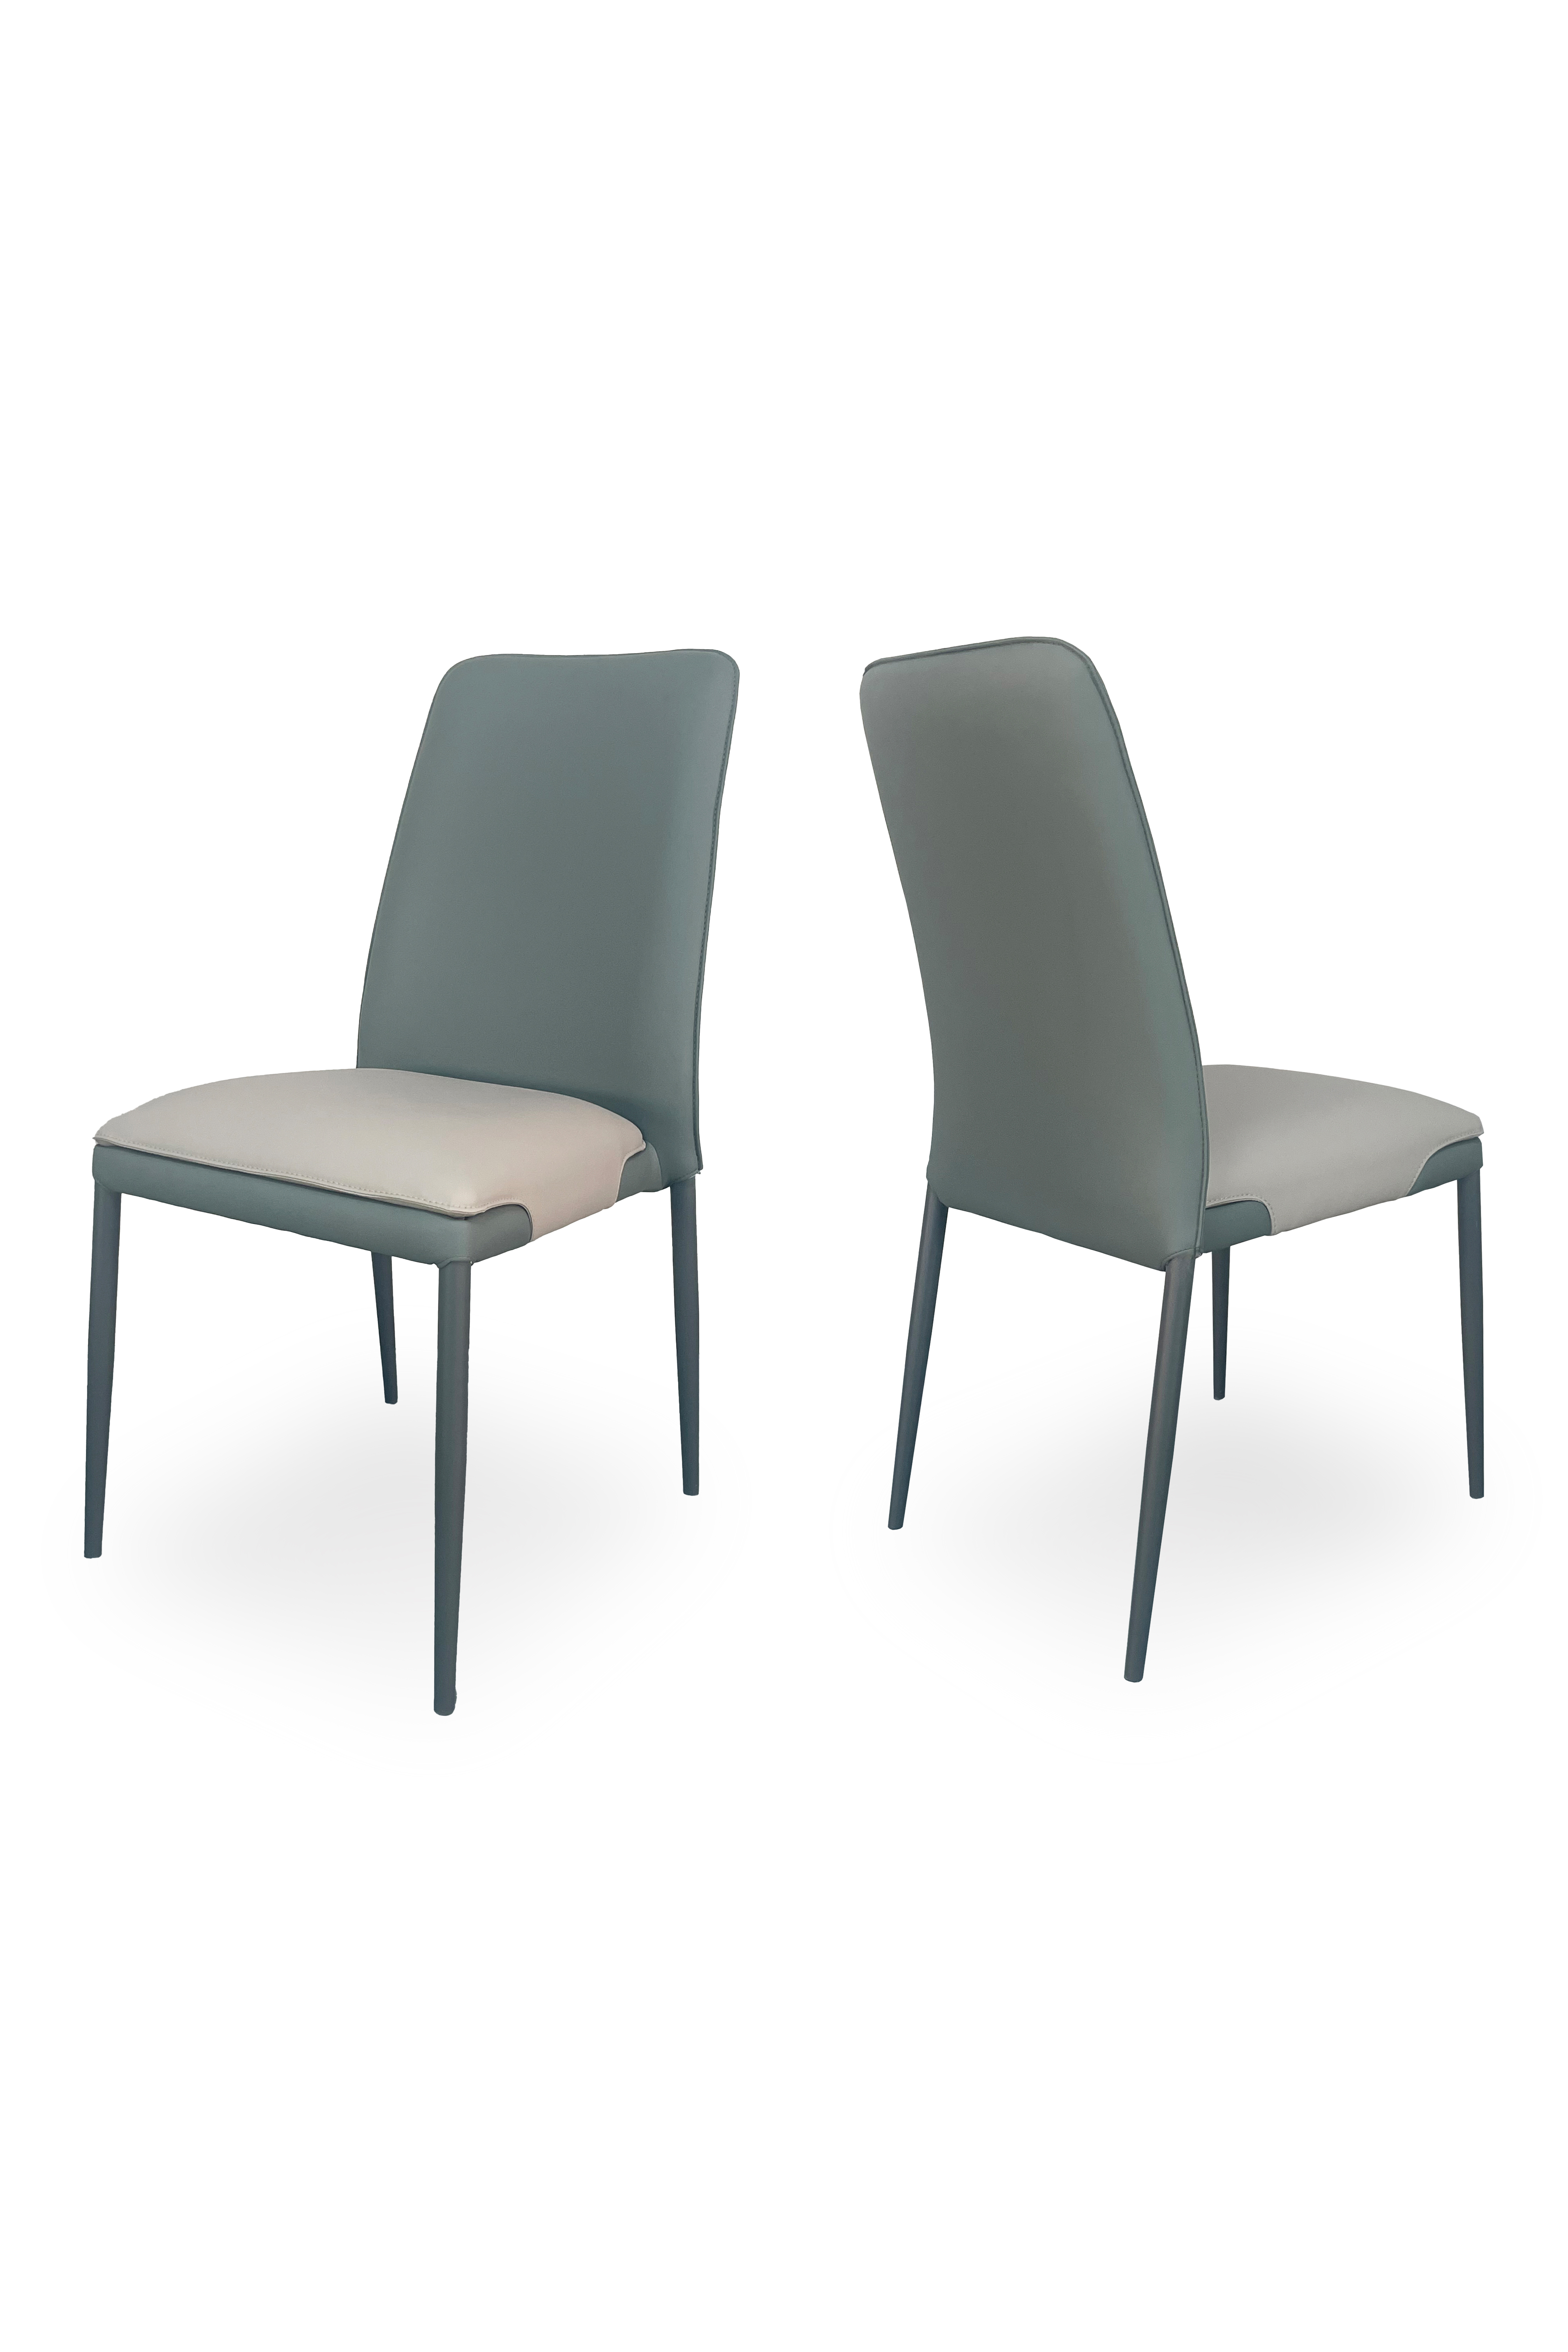 DUMBO ——Contemporary dining chairs